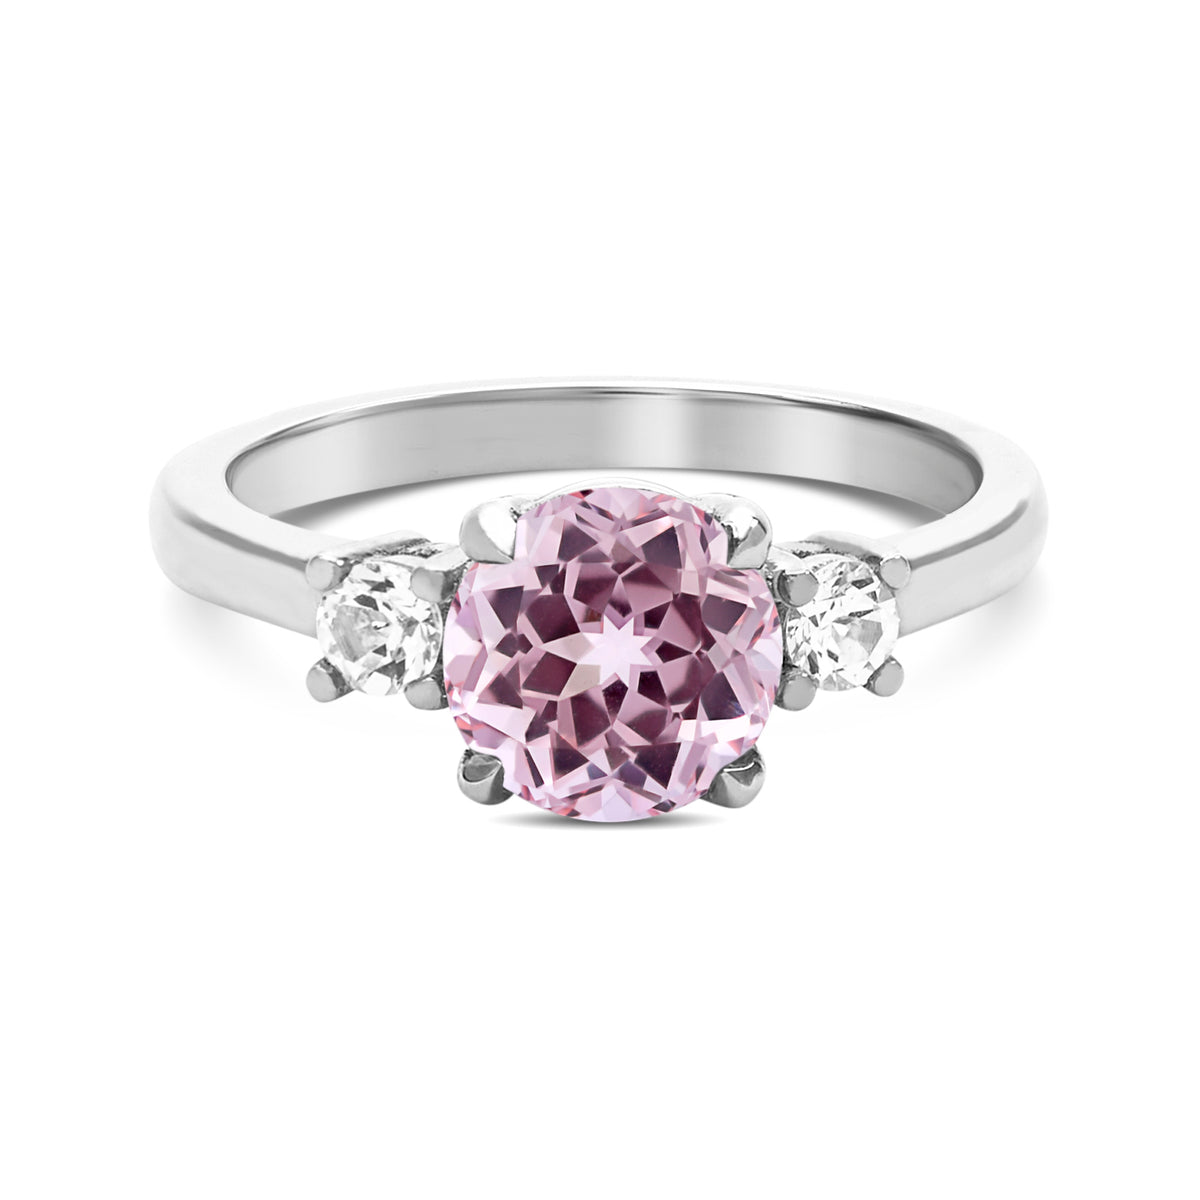 Shefit pink and white - Gem